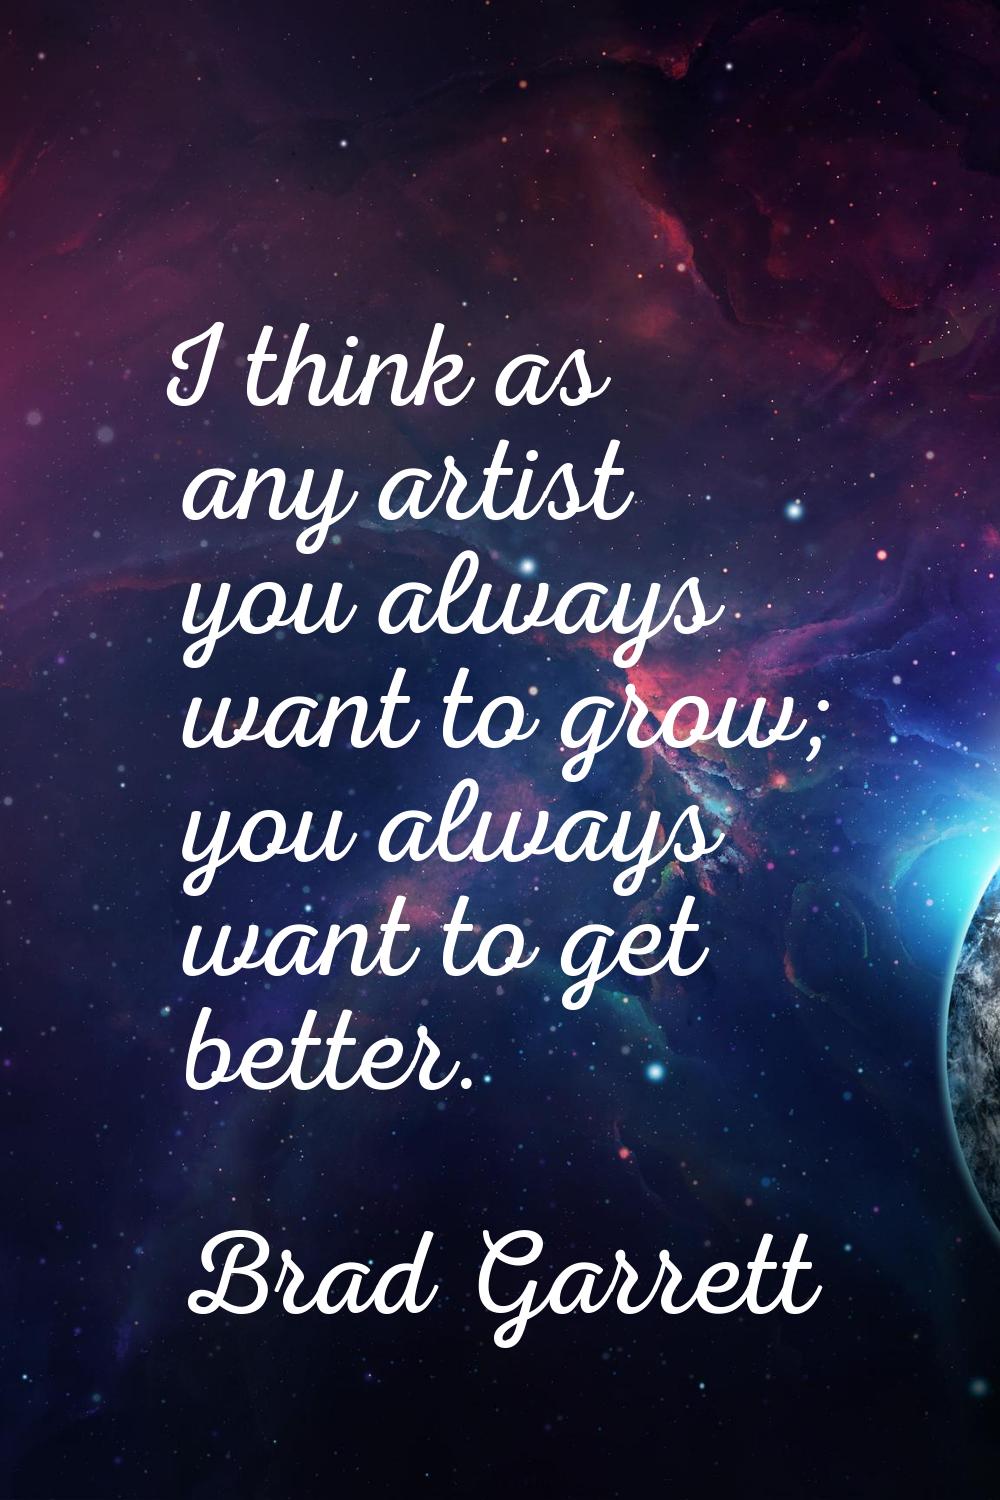 I think as any artist you always want to grow; you always want to get better.